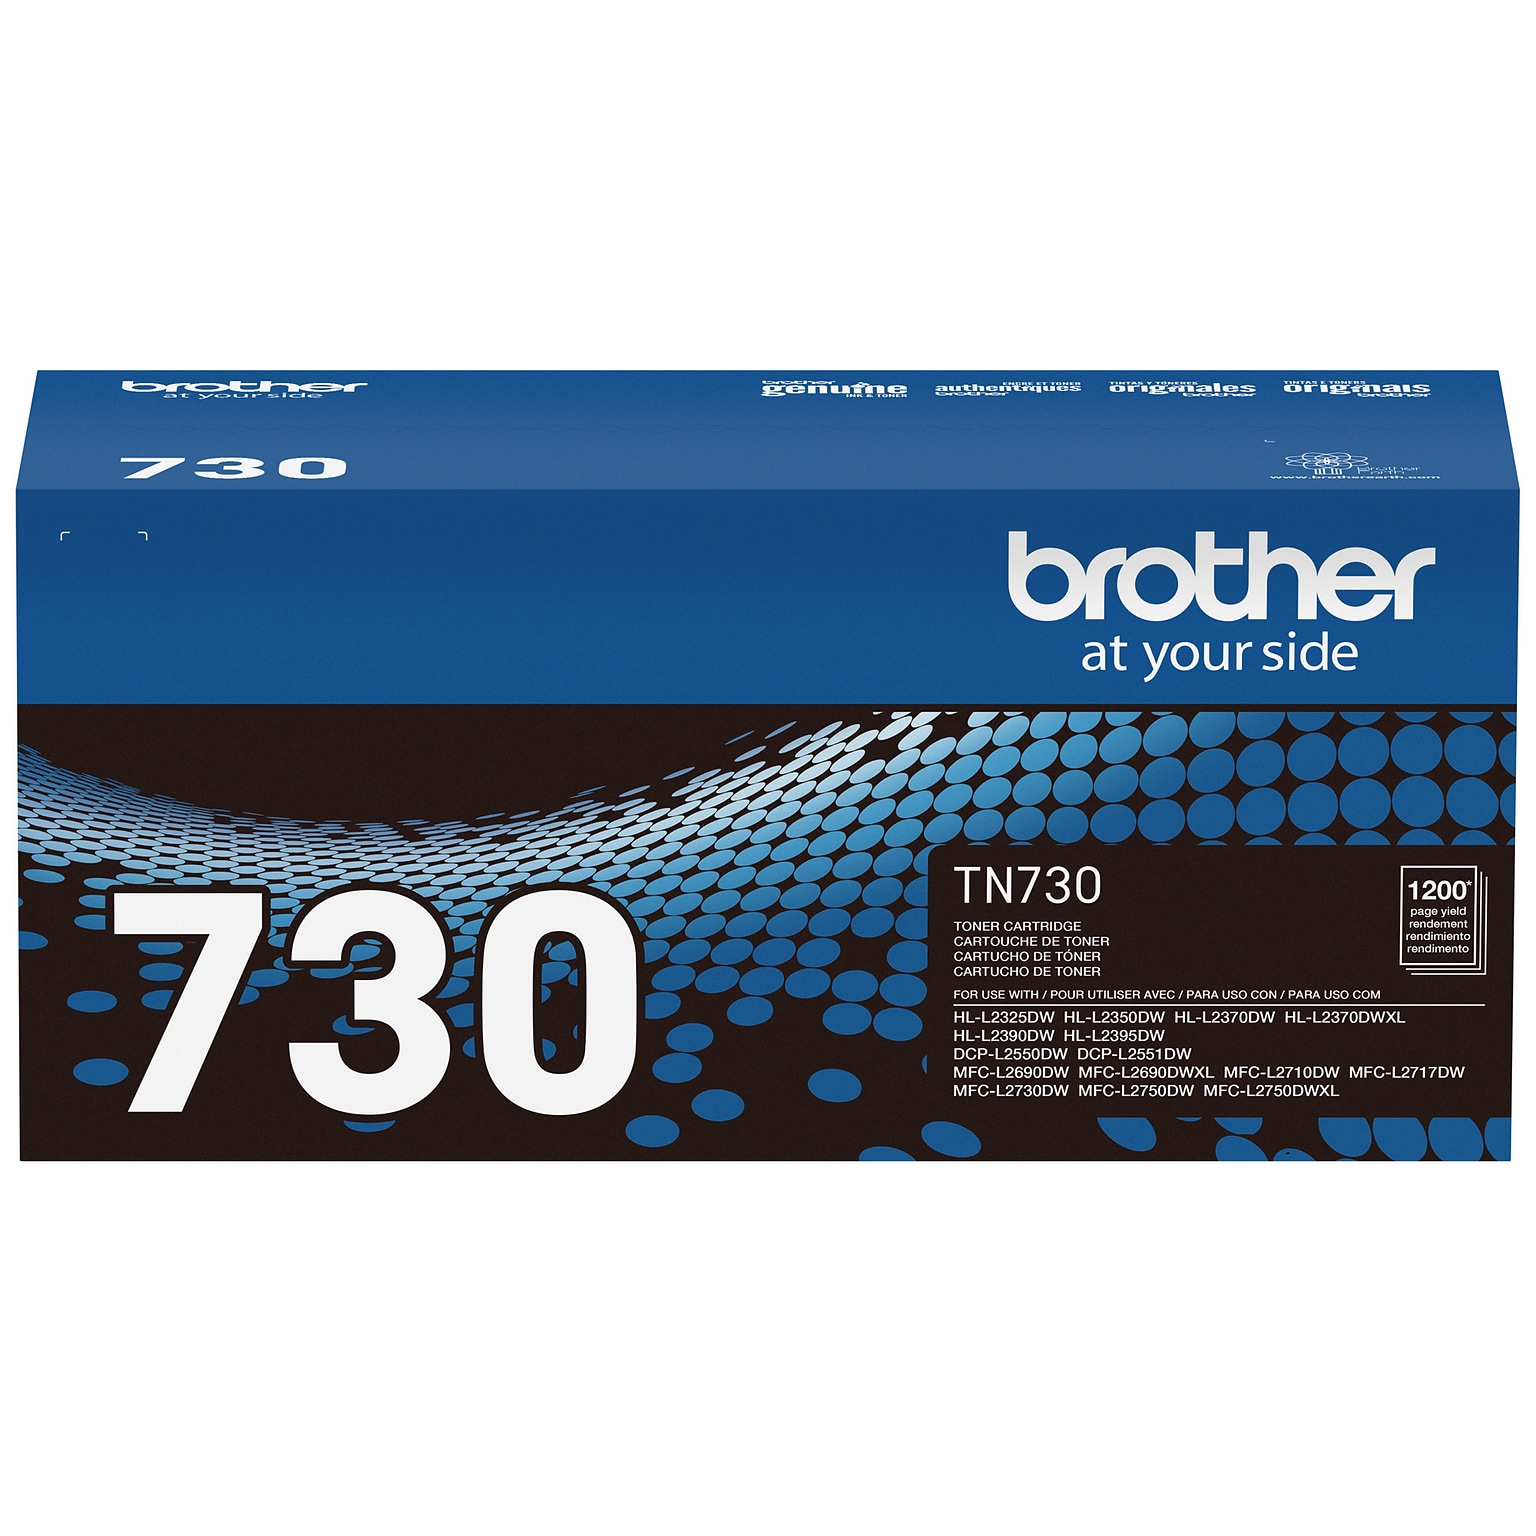 Brother TN 730 Black Standard Yield Toner Cartridge, Print Up to 1,200 Pages